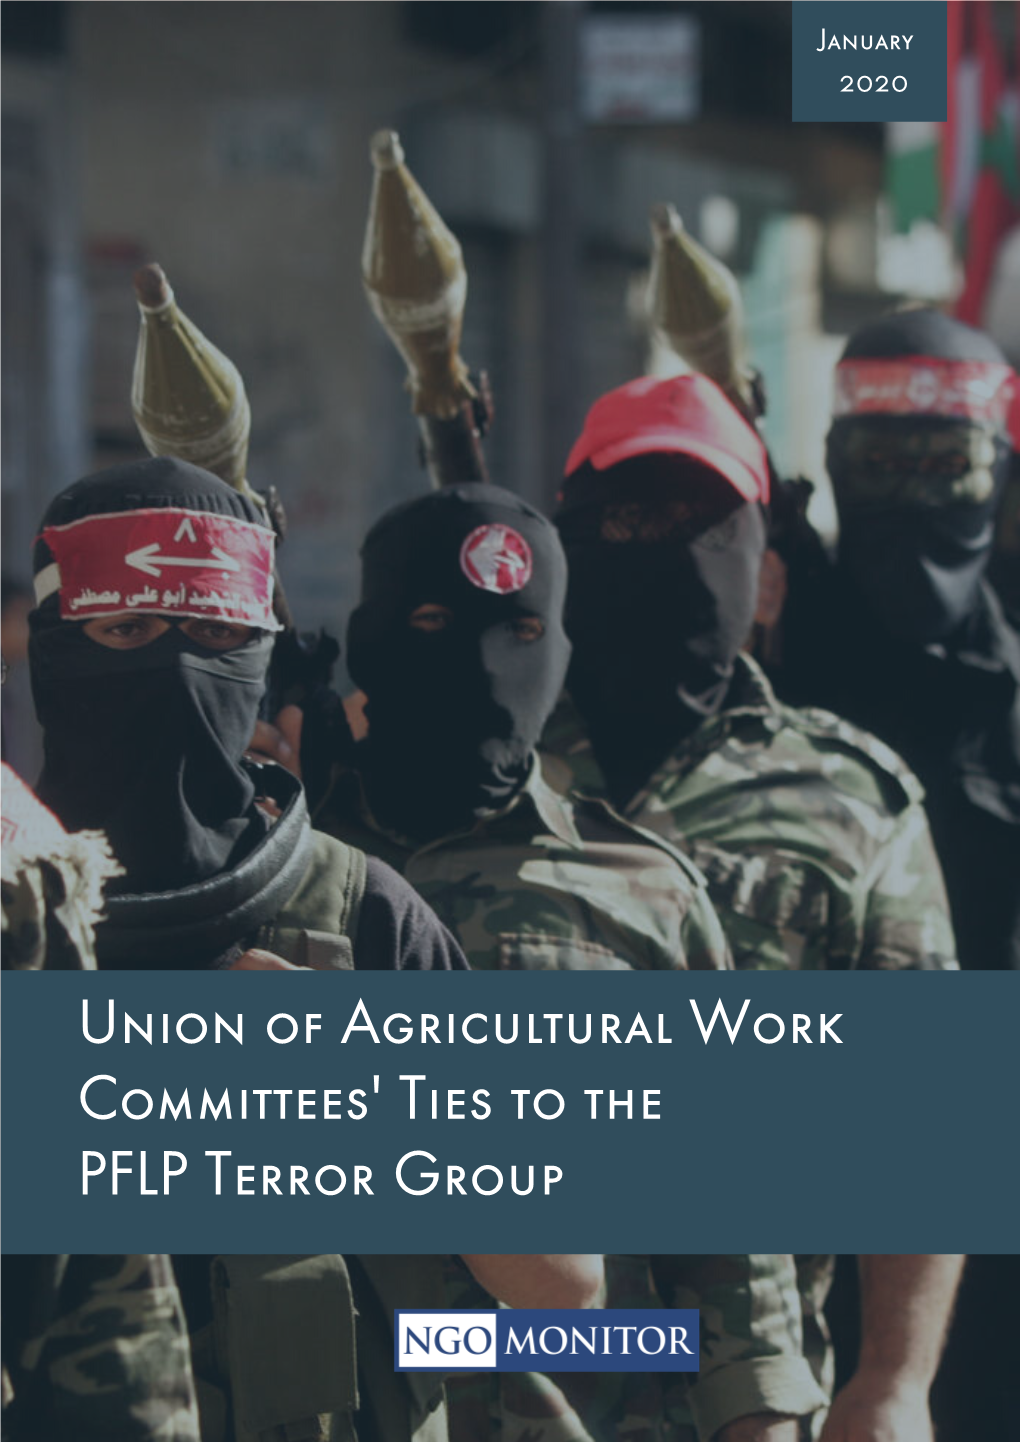 Union of Agricultural Work Committees' Ties to the PFLP Terror Group